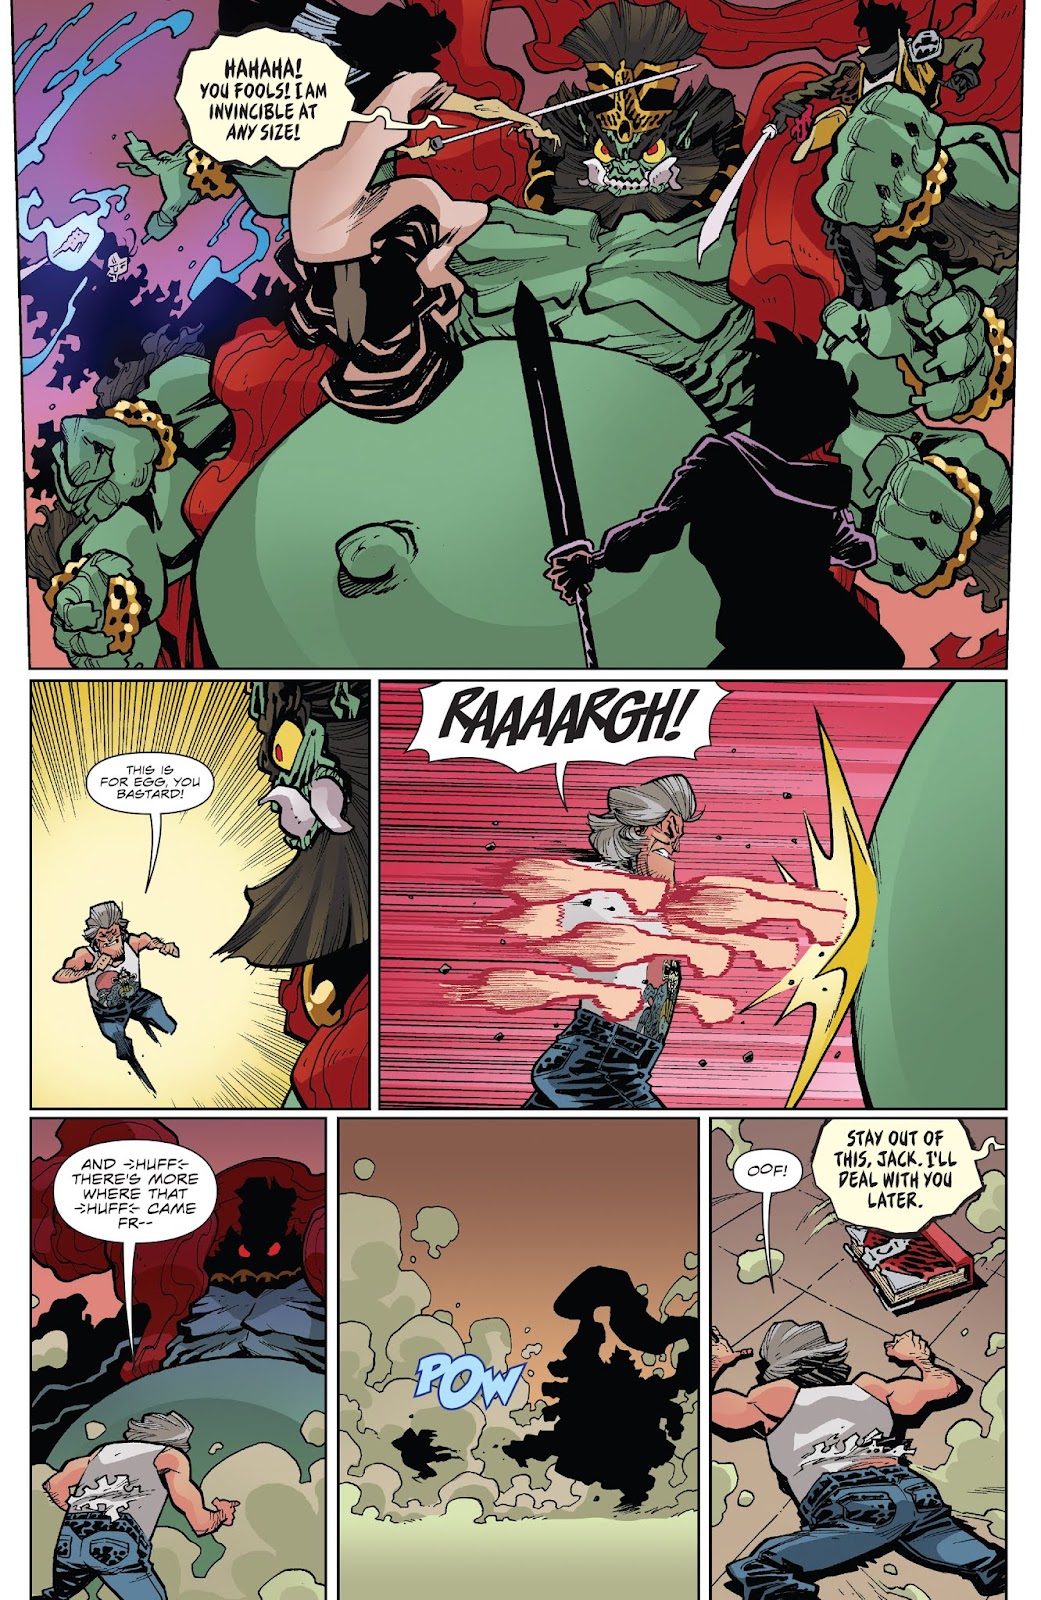 Big Trouble in Little China: Old Man Jack issue 9 - Page 18